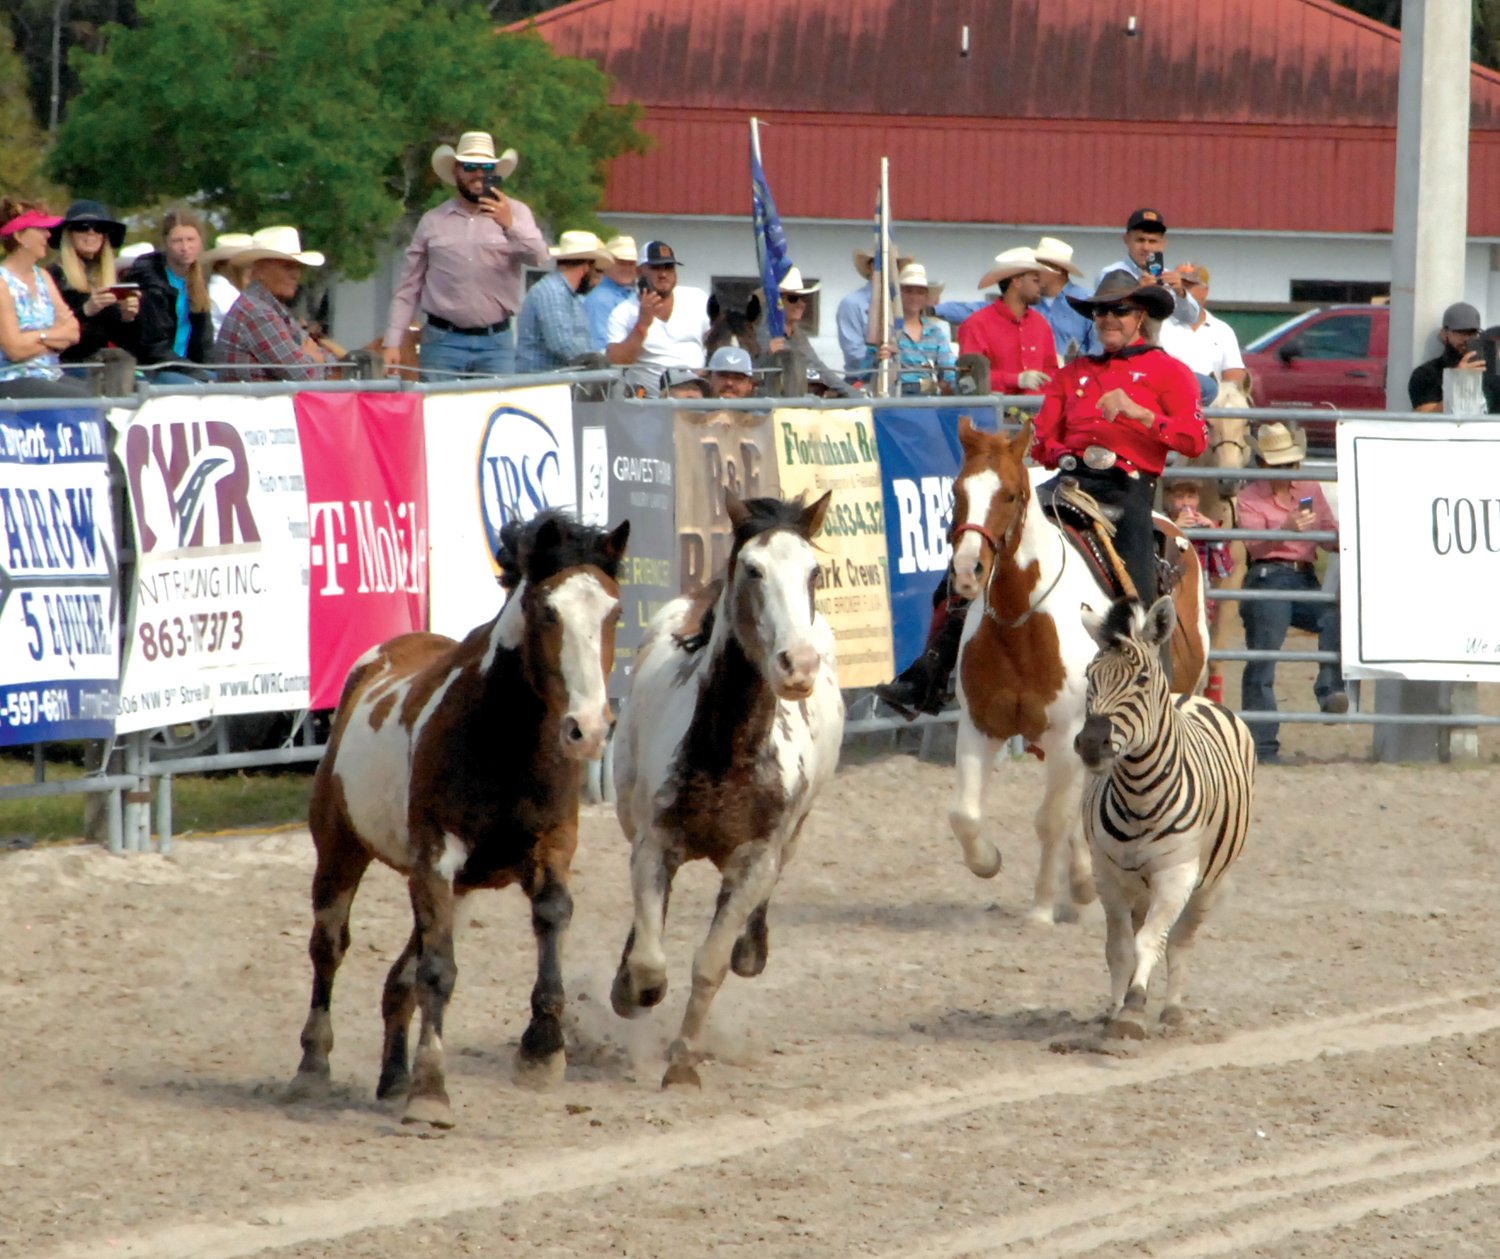 OKEECHOBEE -- The One Armed Bandit thrilled rodeo fans with feats or horsemanship.